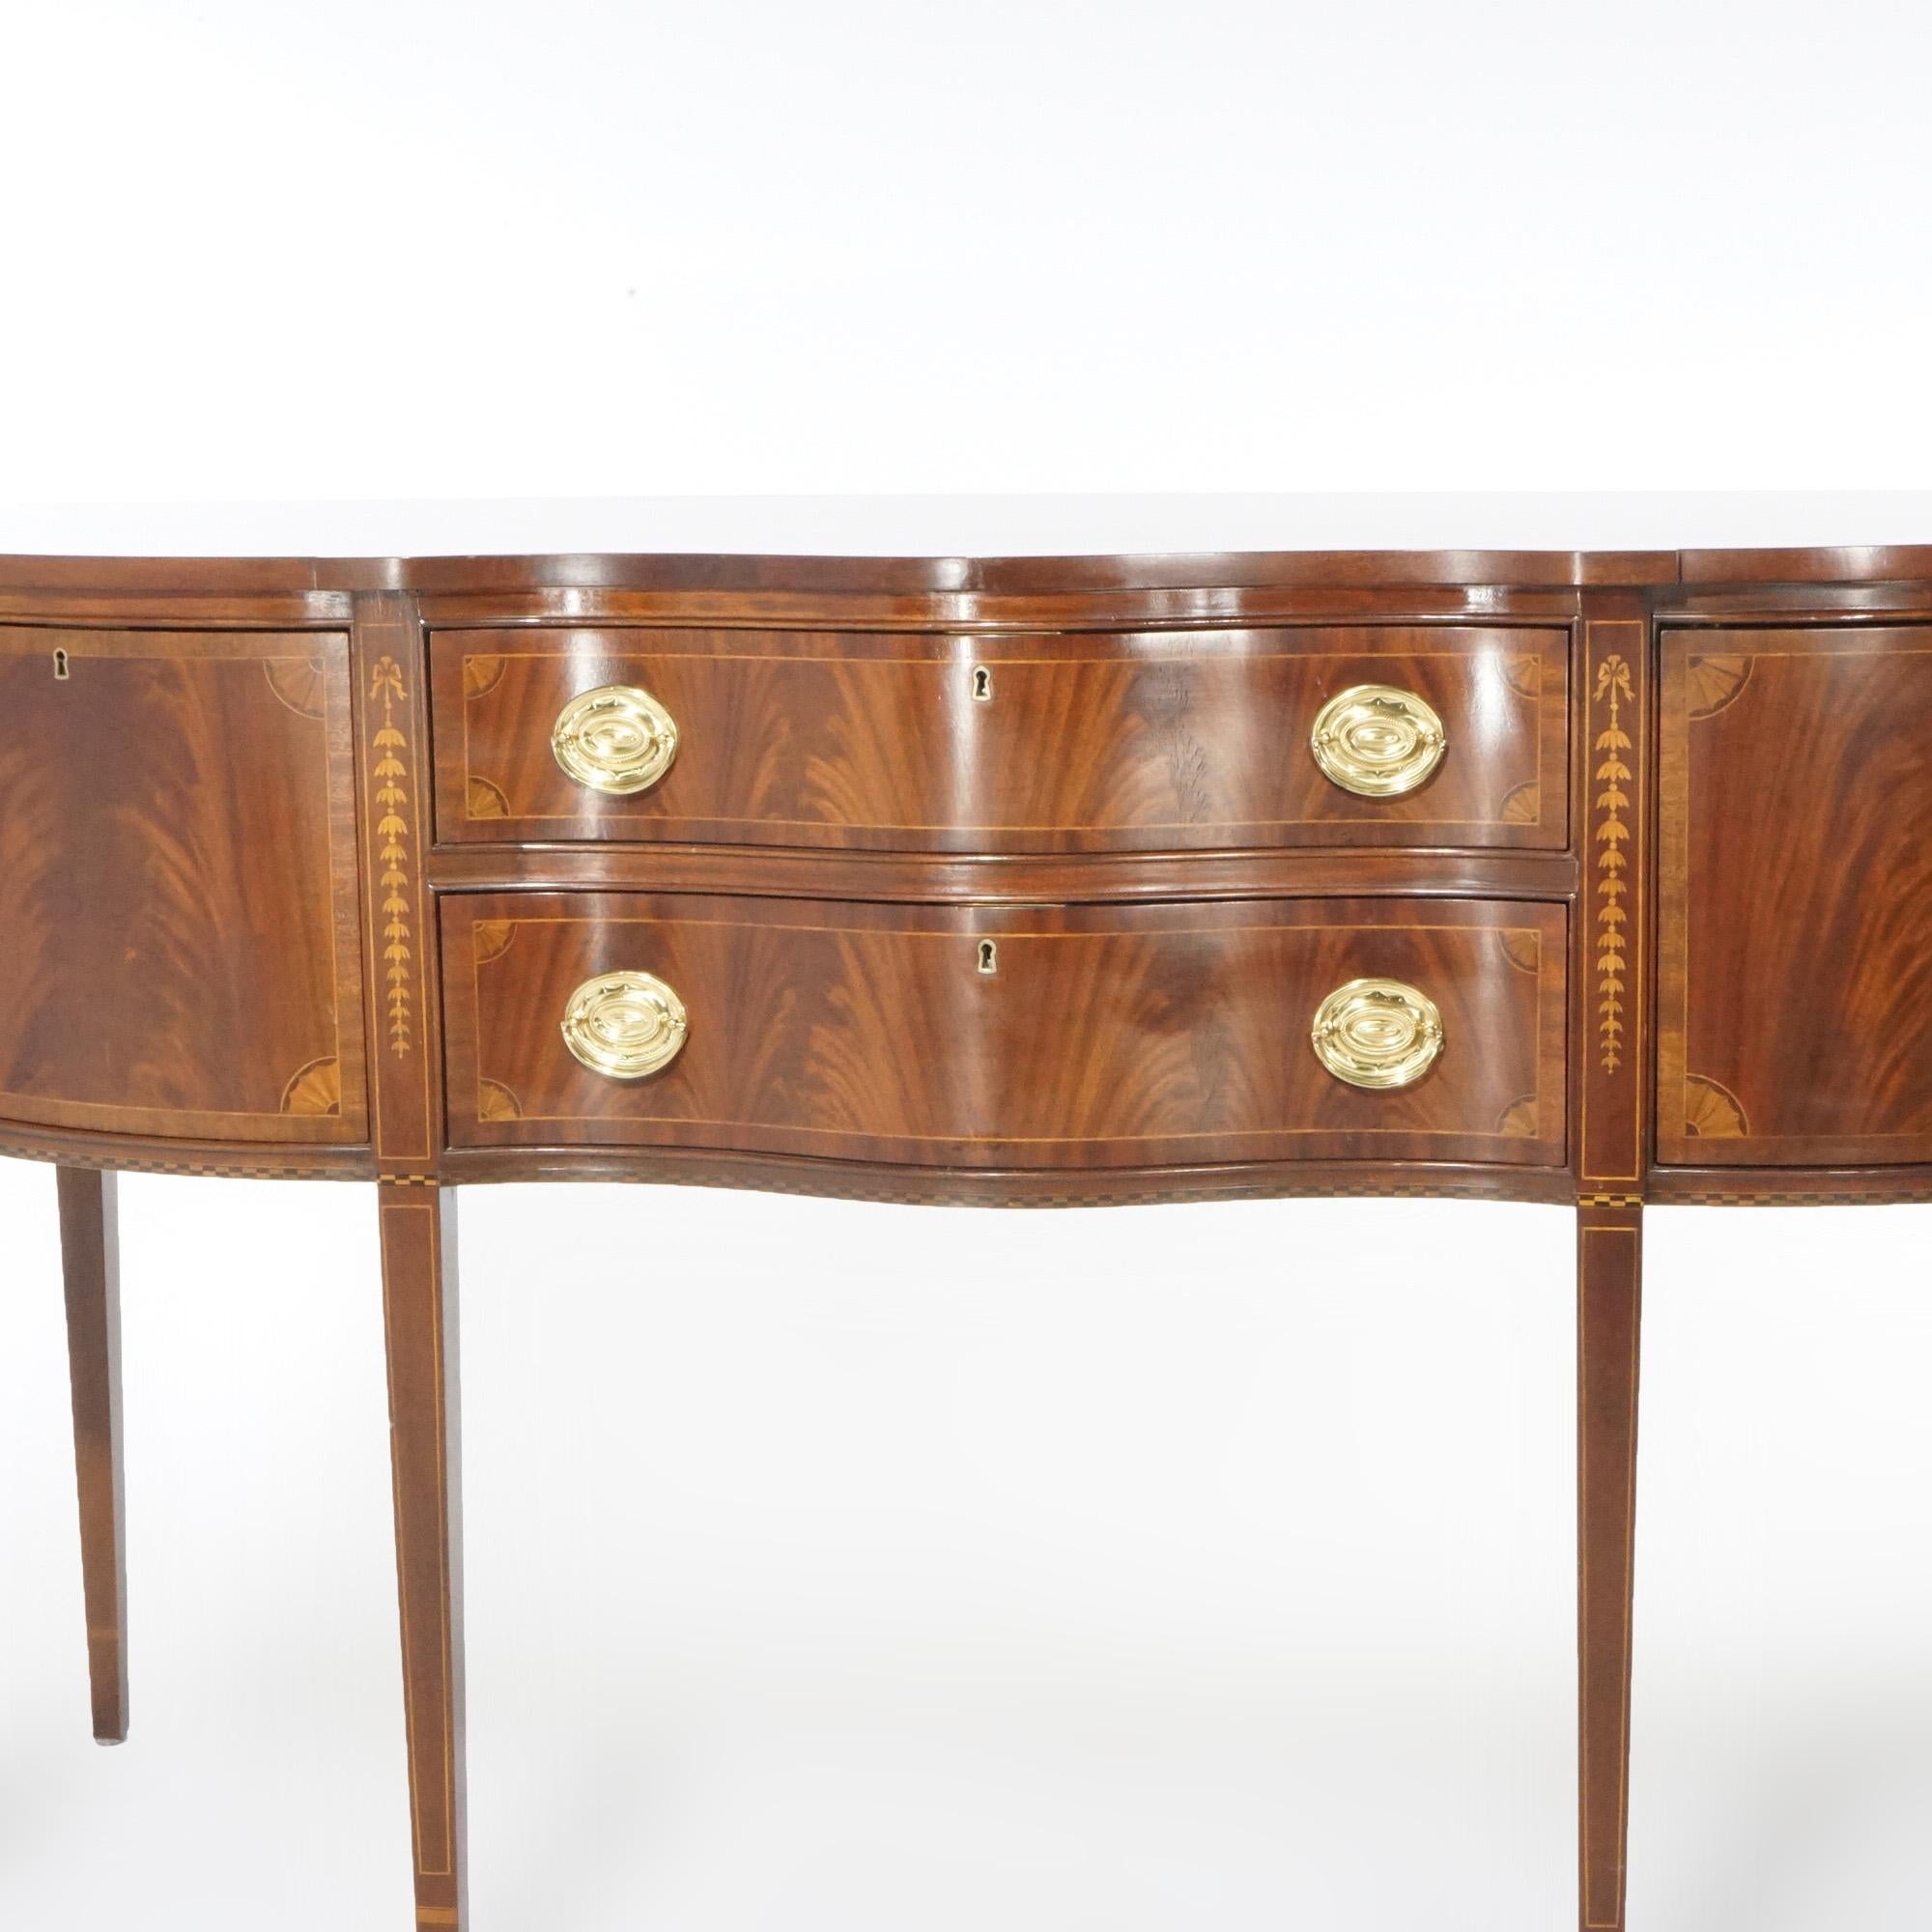 An English Hepplewhite style sideboard by Council Craftsmen offers flame mahogany construction in serpentine form with two drawers having flanking cabinets, inlaid satinwood banding and stylized inverted bellflower garland, raised on straight taper